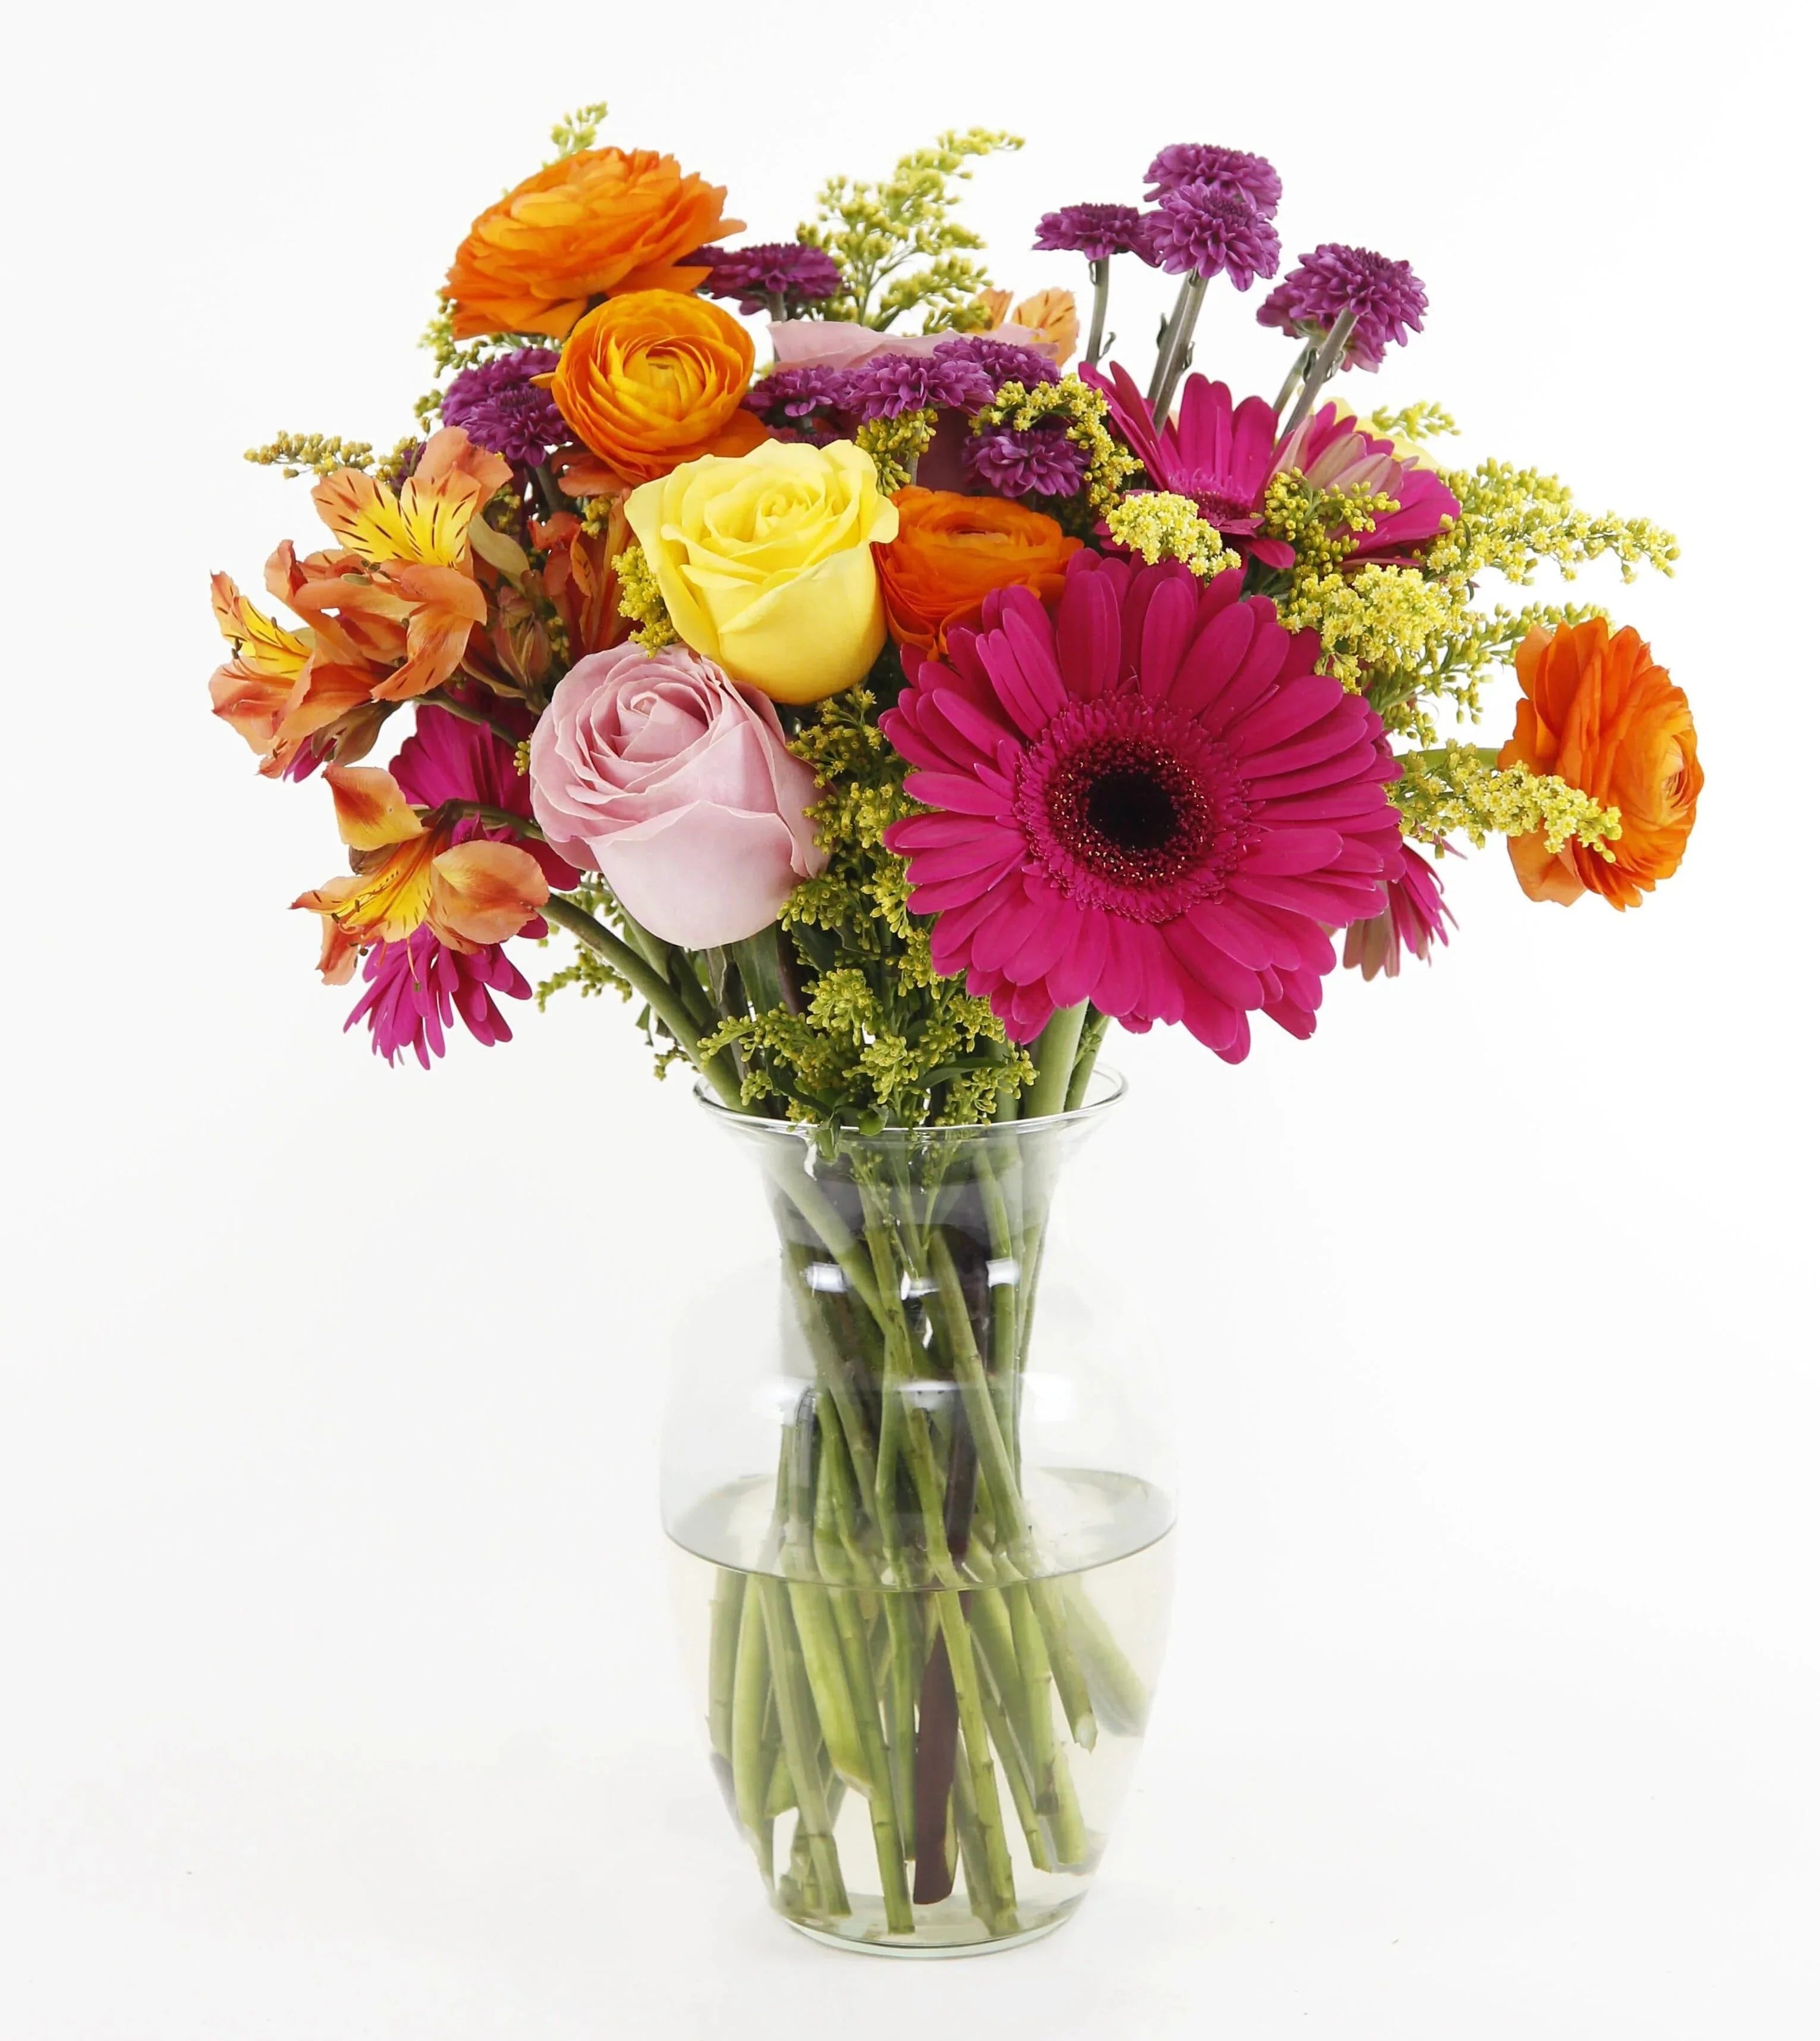 Amazing Mom Mother’s Day Bouquet Standard - Vase of pink mini gerbera daisies, orange ranunculus, yellow roses, pink roses, purple button poms, orange Peruvian Lilies, yellow solidago, and lush greens